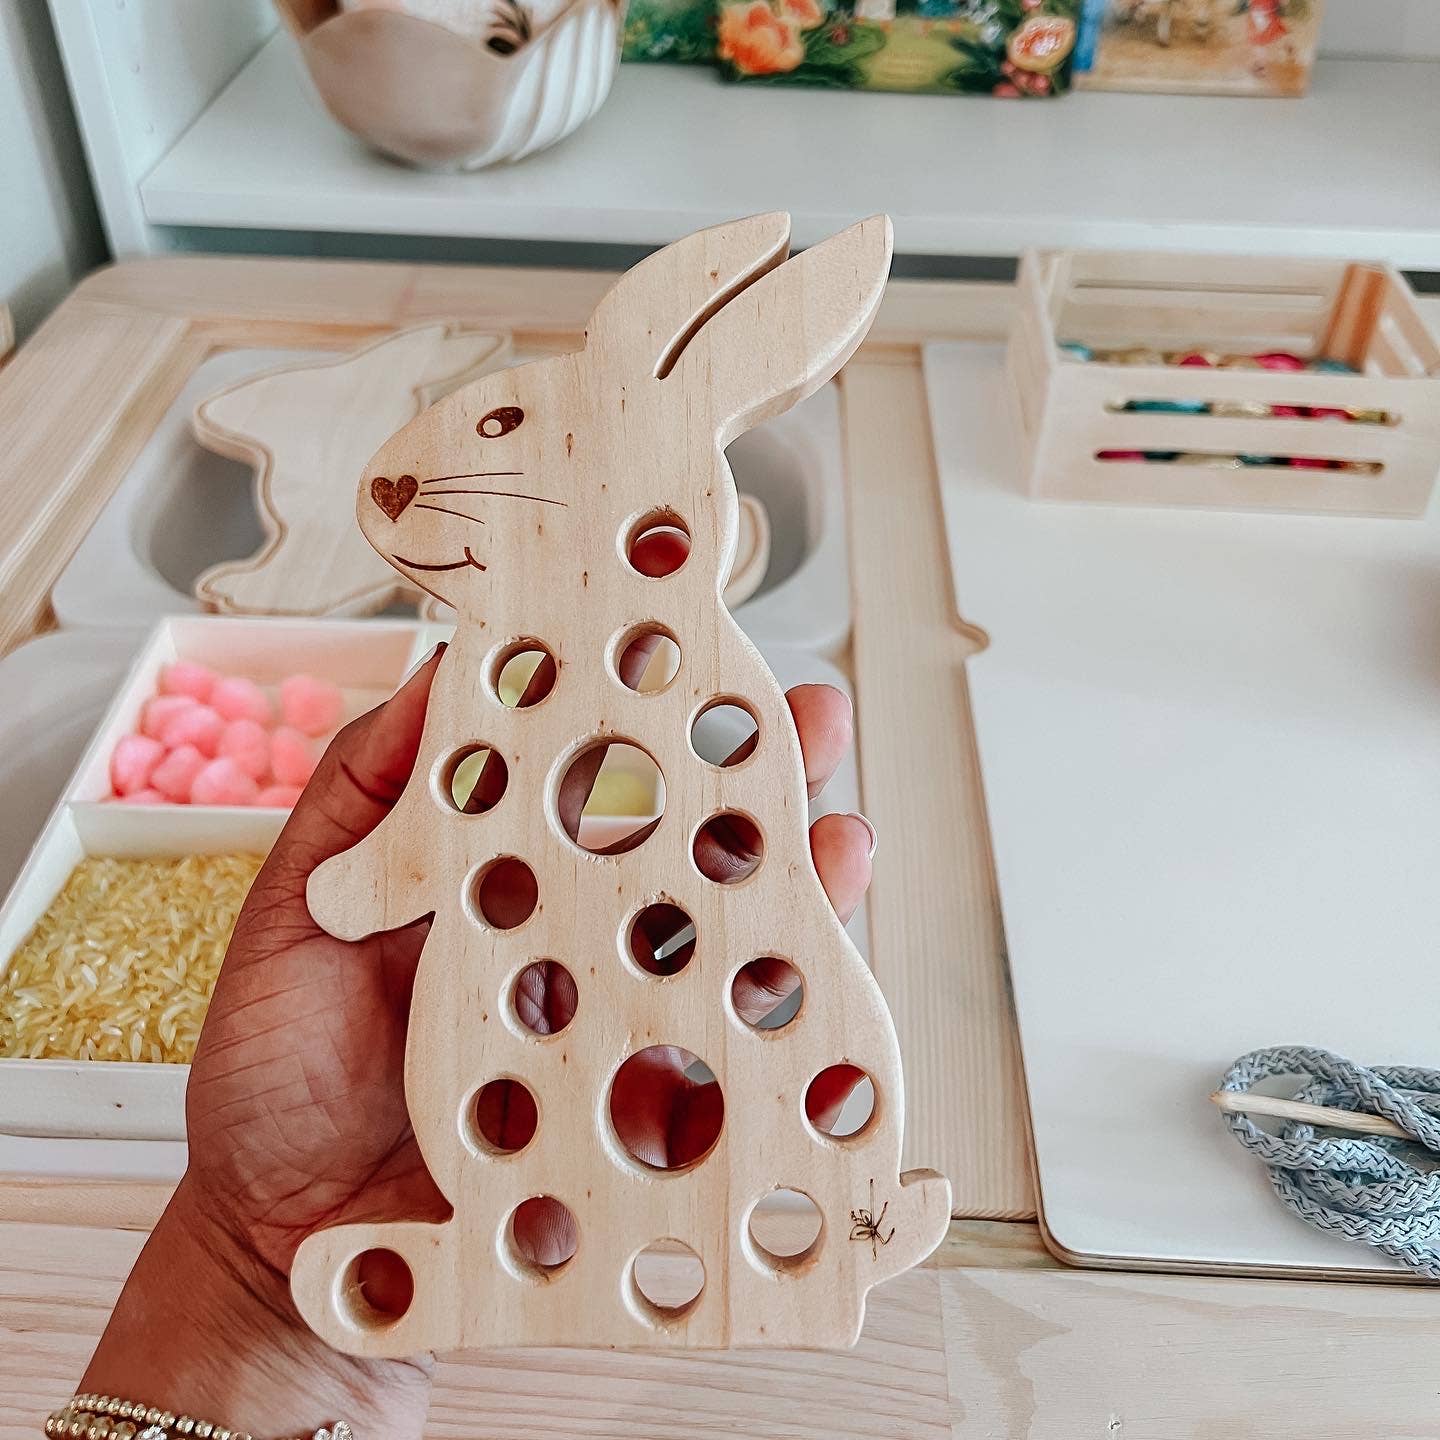 Lacing and Sorting Wooden Bunny